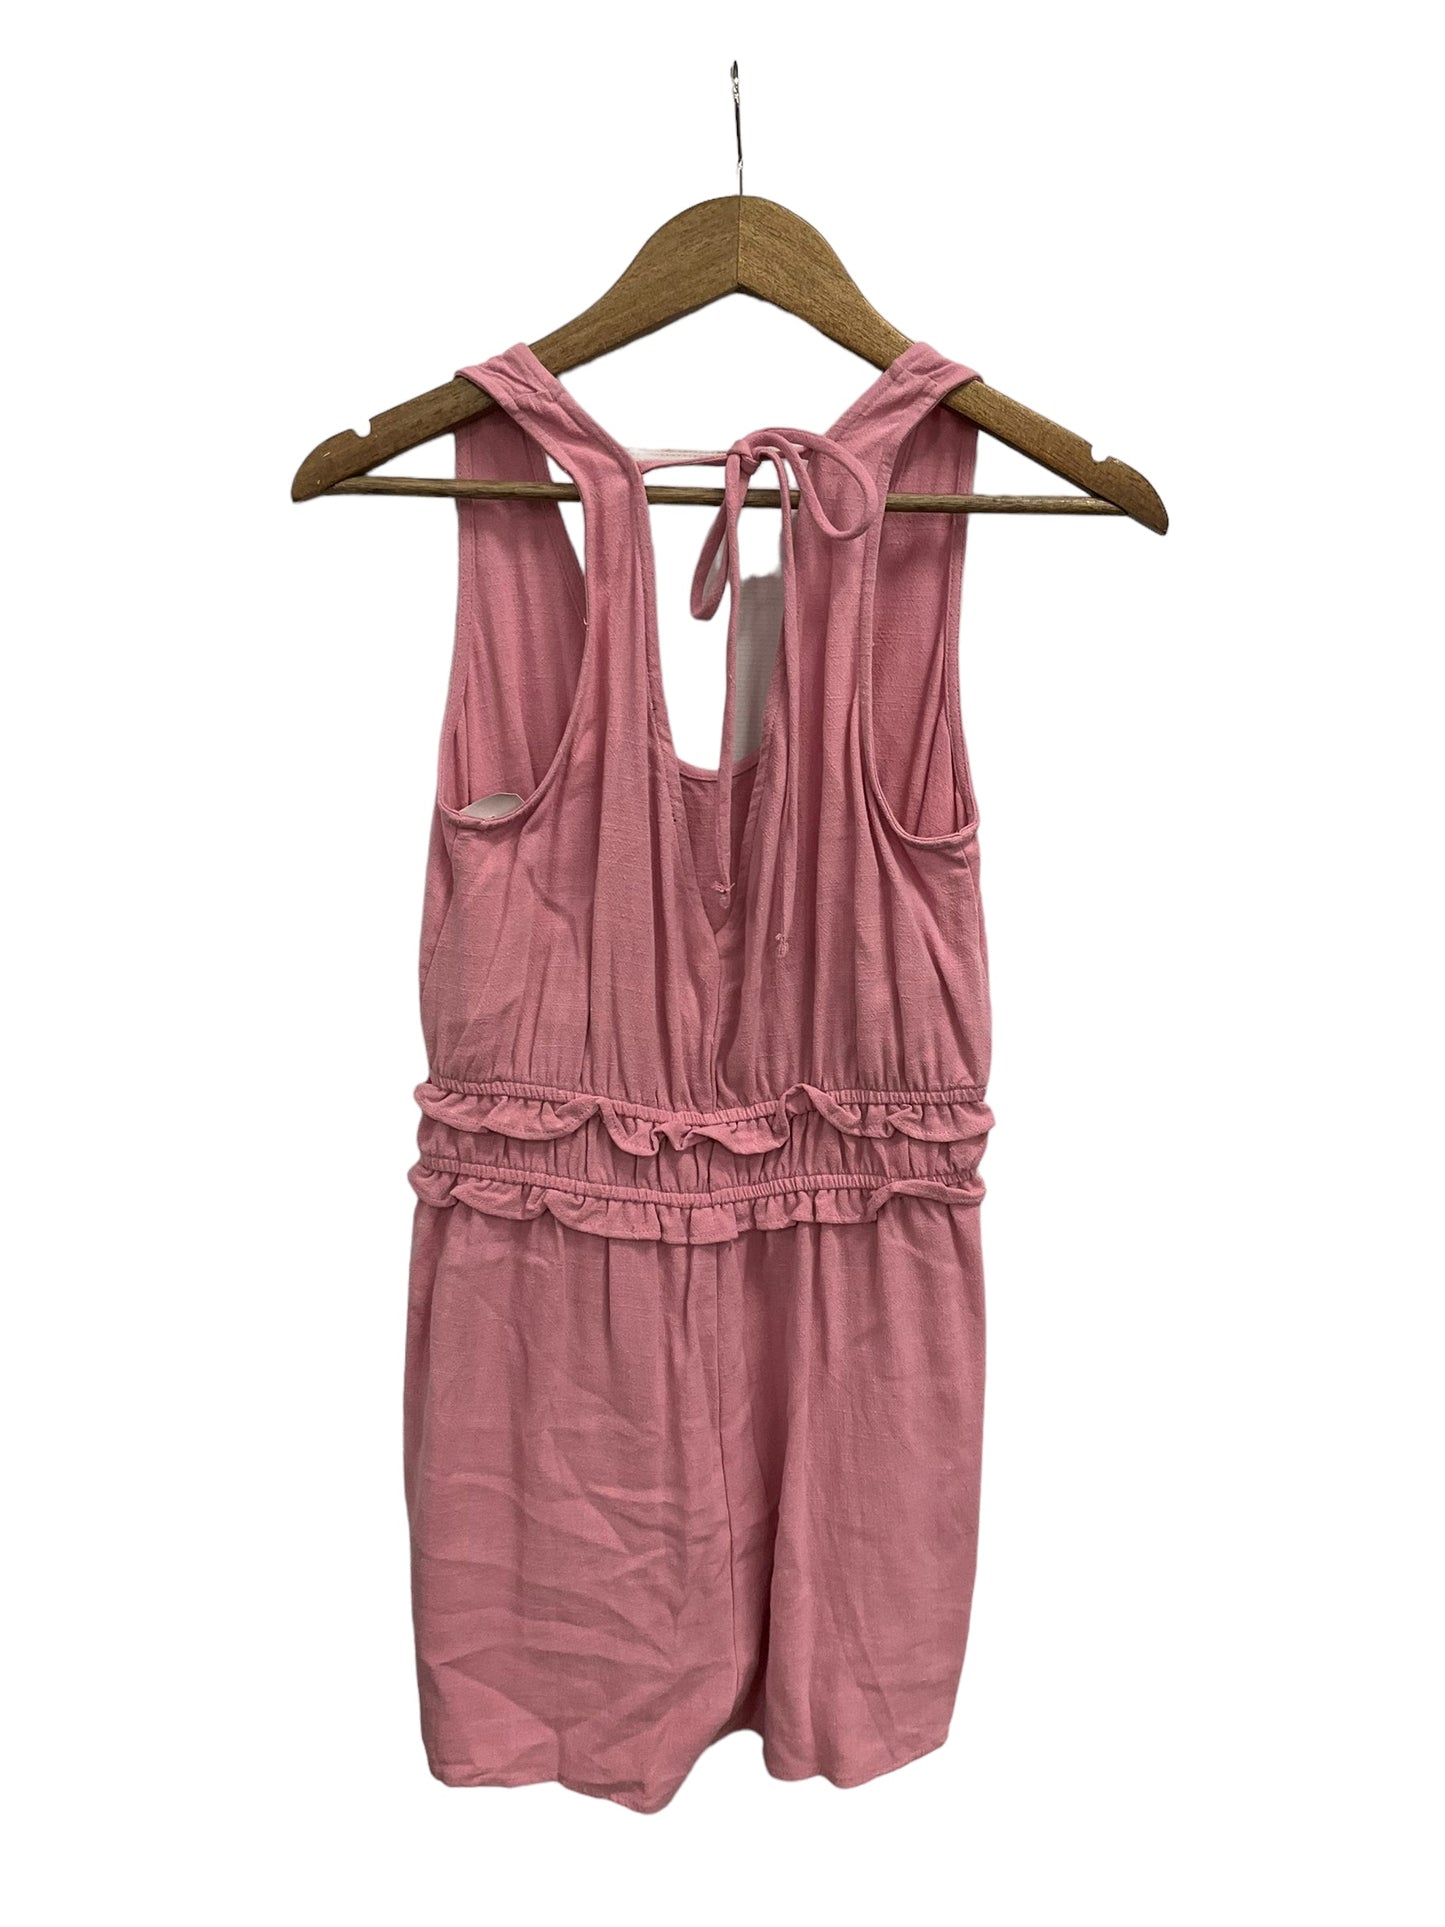 Romper By One Clothing  Size: M